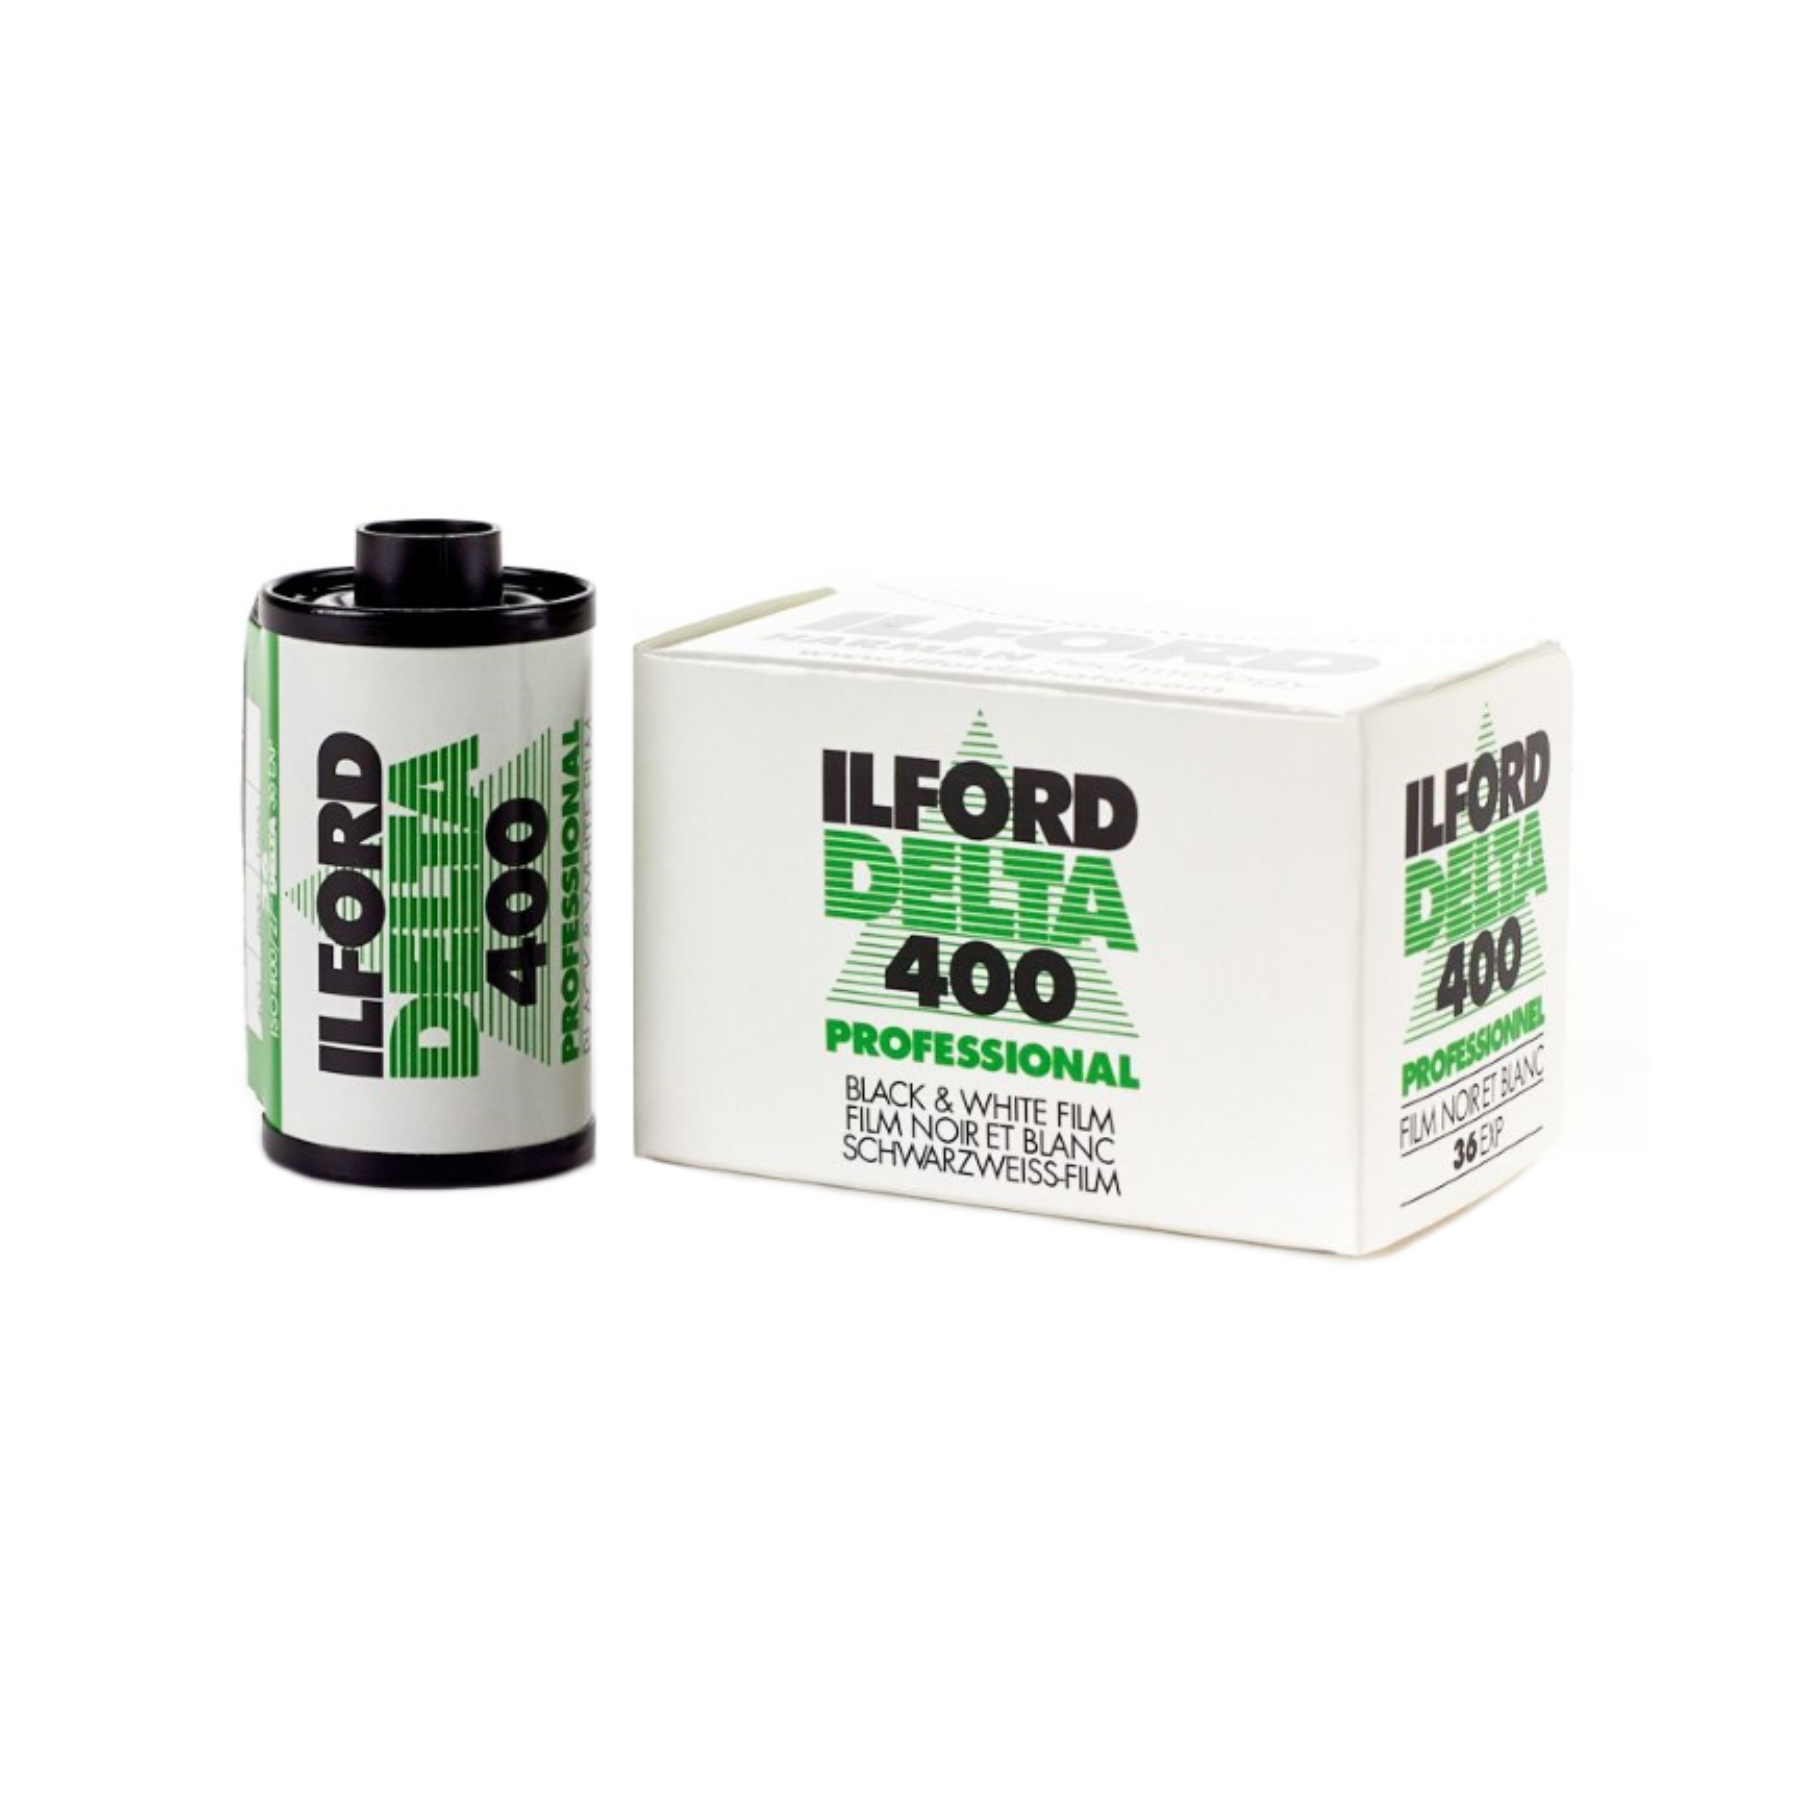 Buy Ilford Delta 400 ISO PROFESSIONAL 35mm 36 Exposure Black & White Film at Topic Store